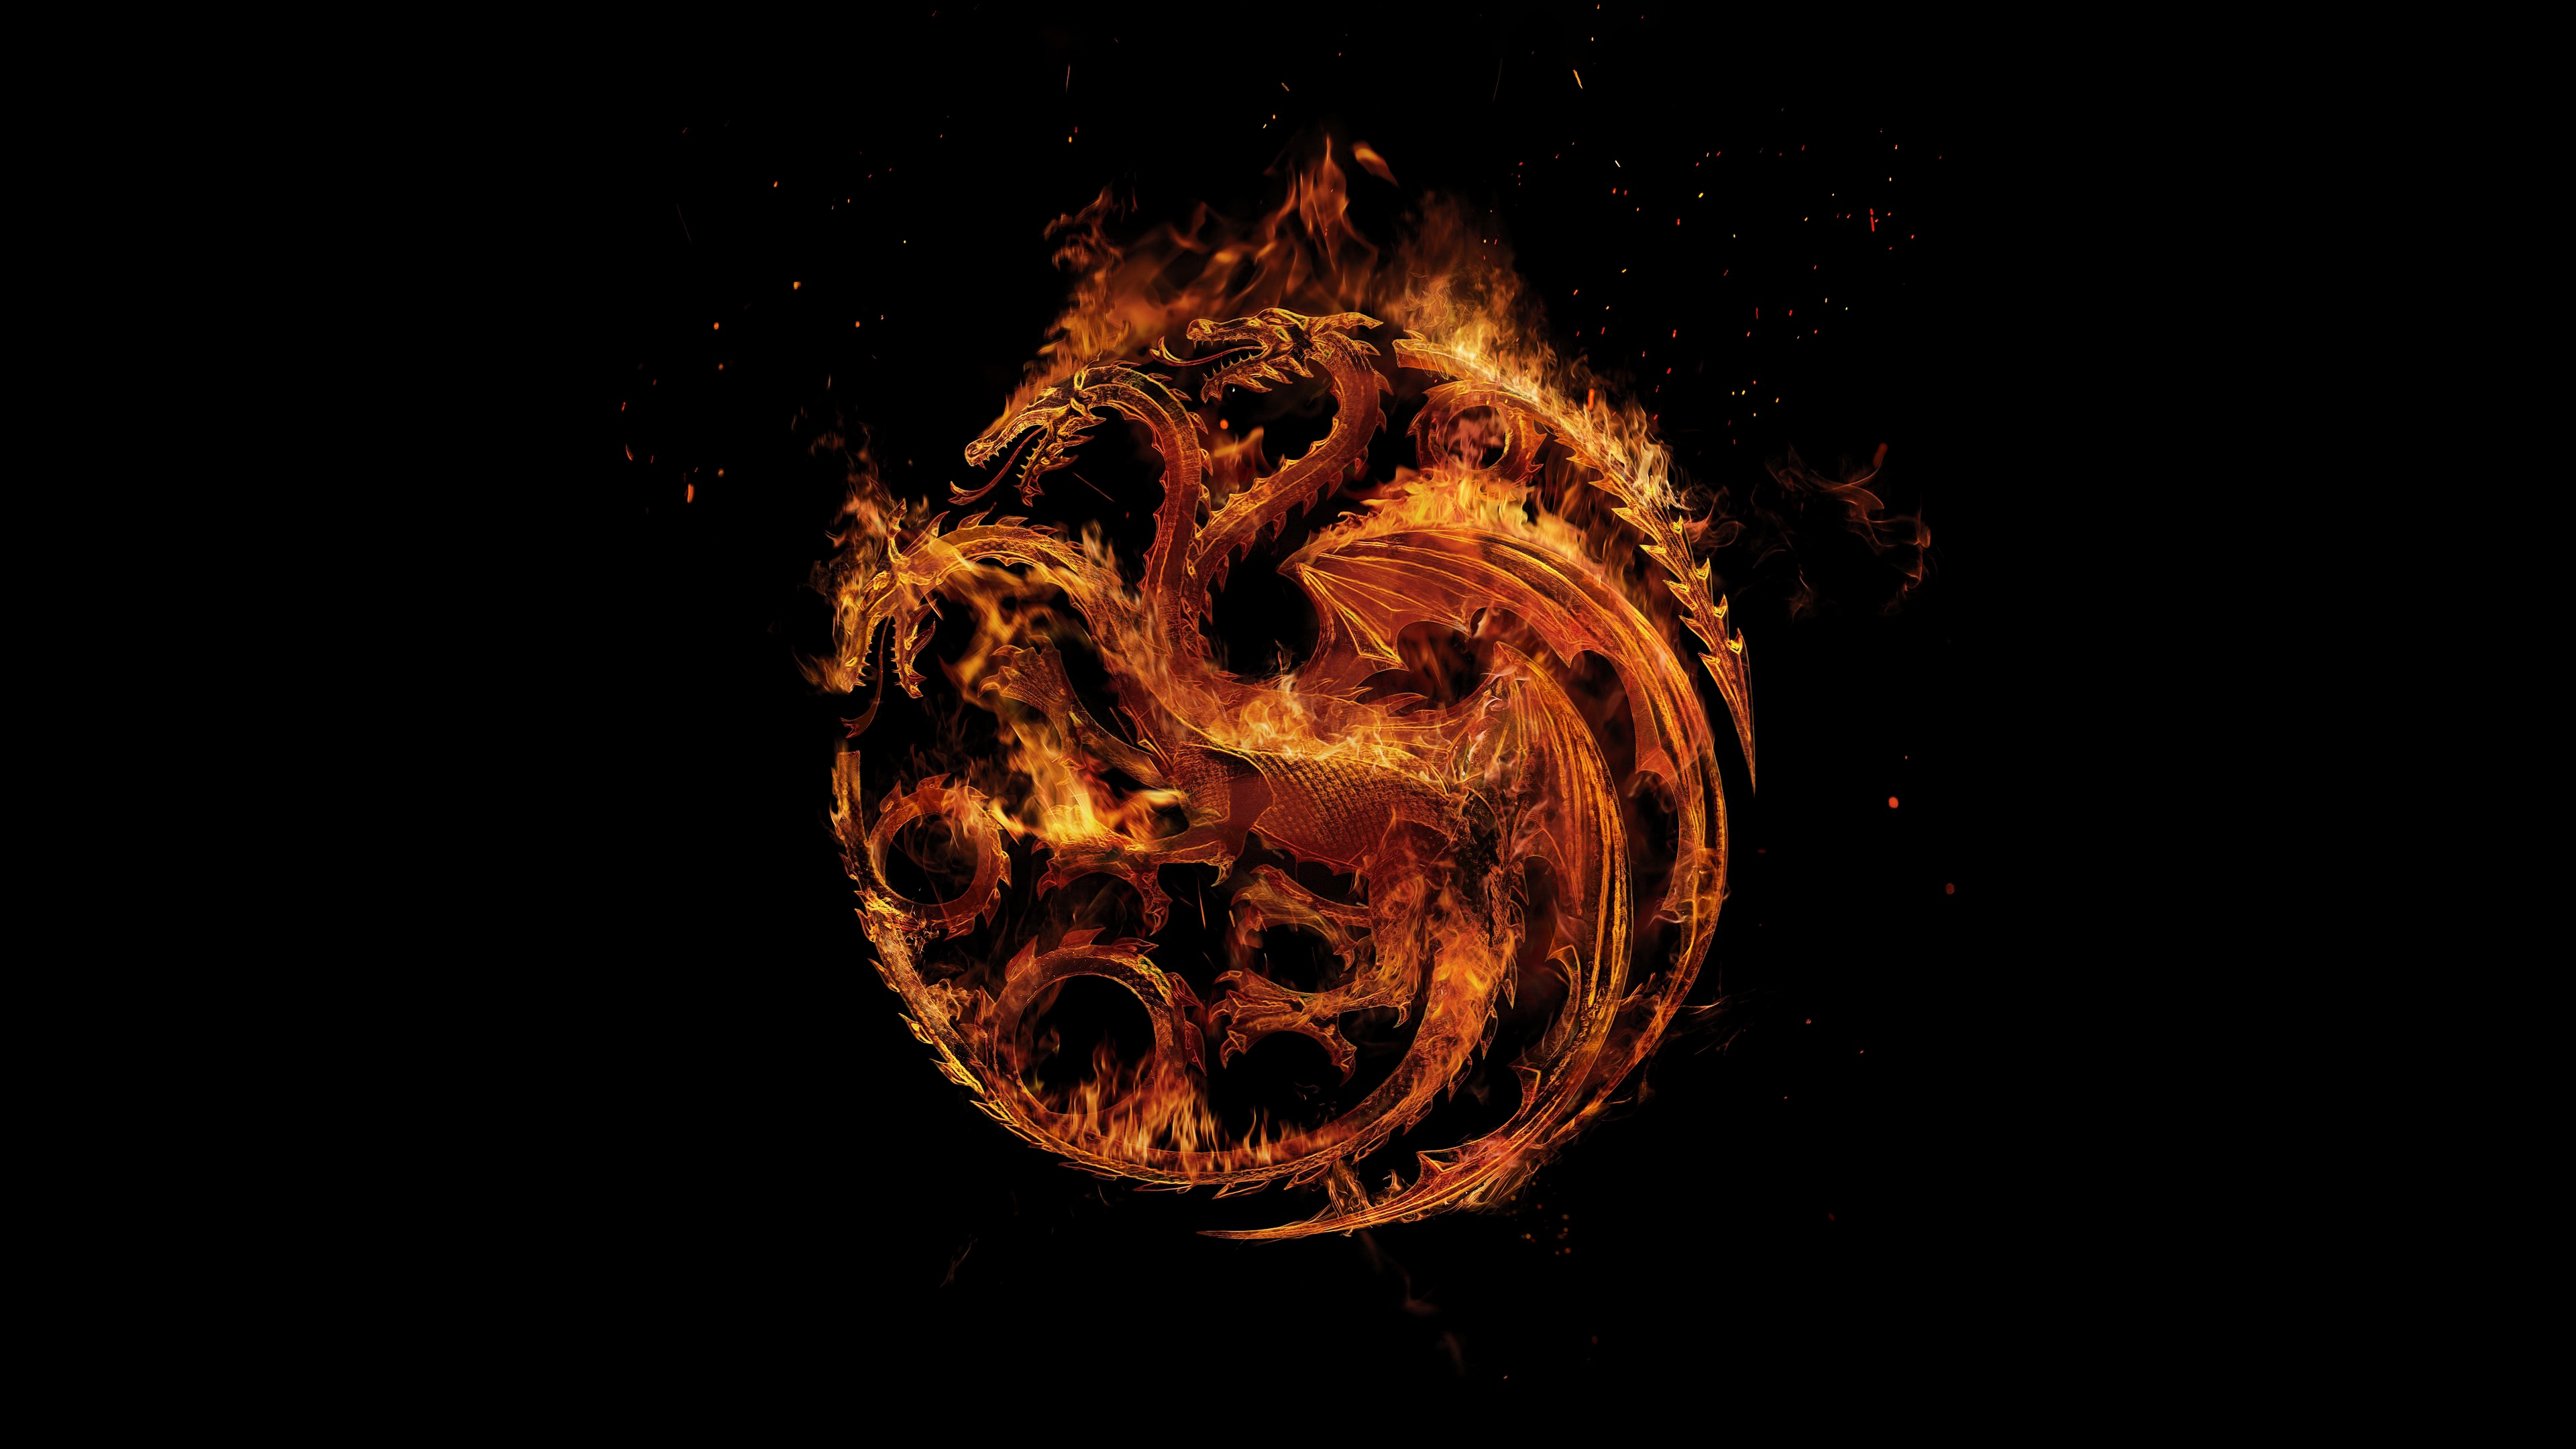 HD wallpaper, Black Background, Fire And Blood, House Of The Dragon, House Targaryen Sigil, 2022 Series